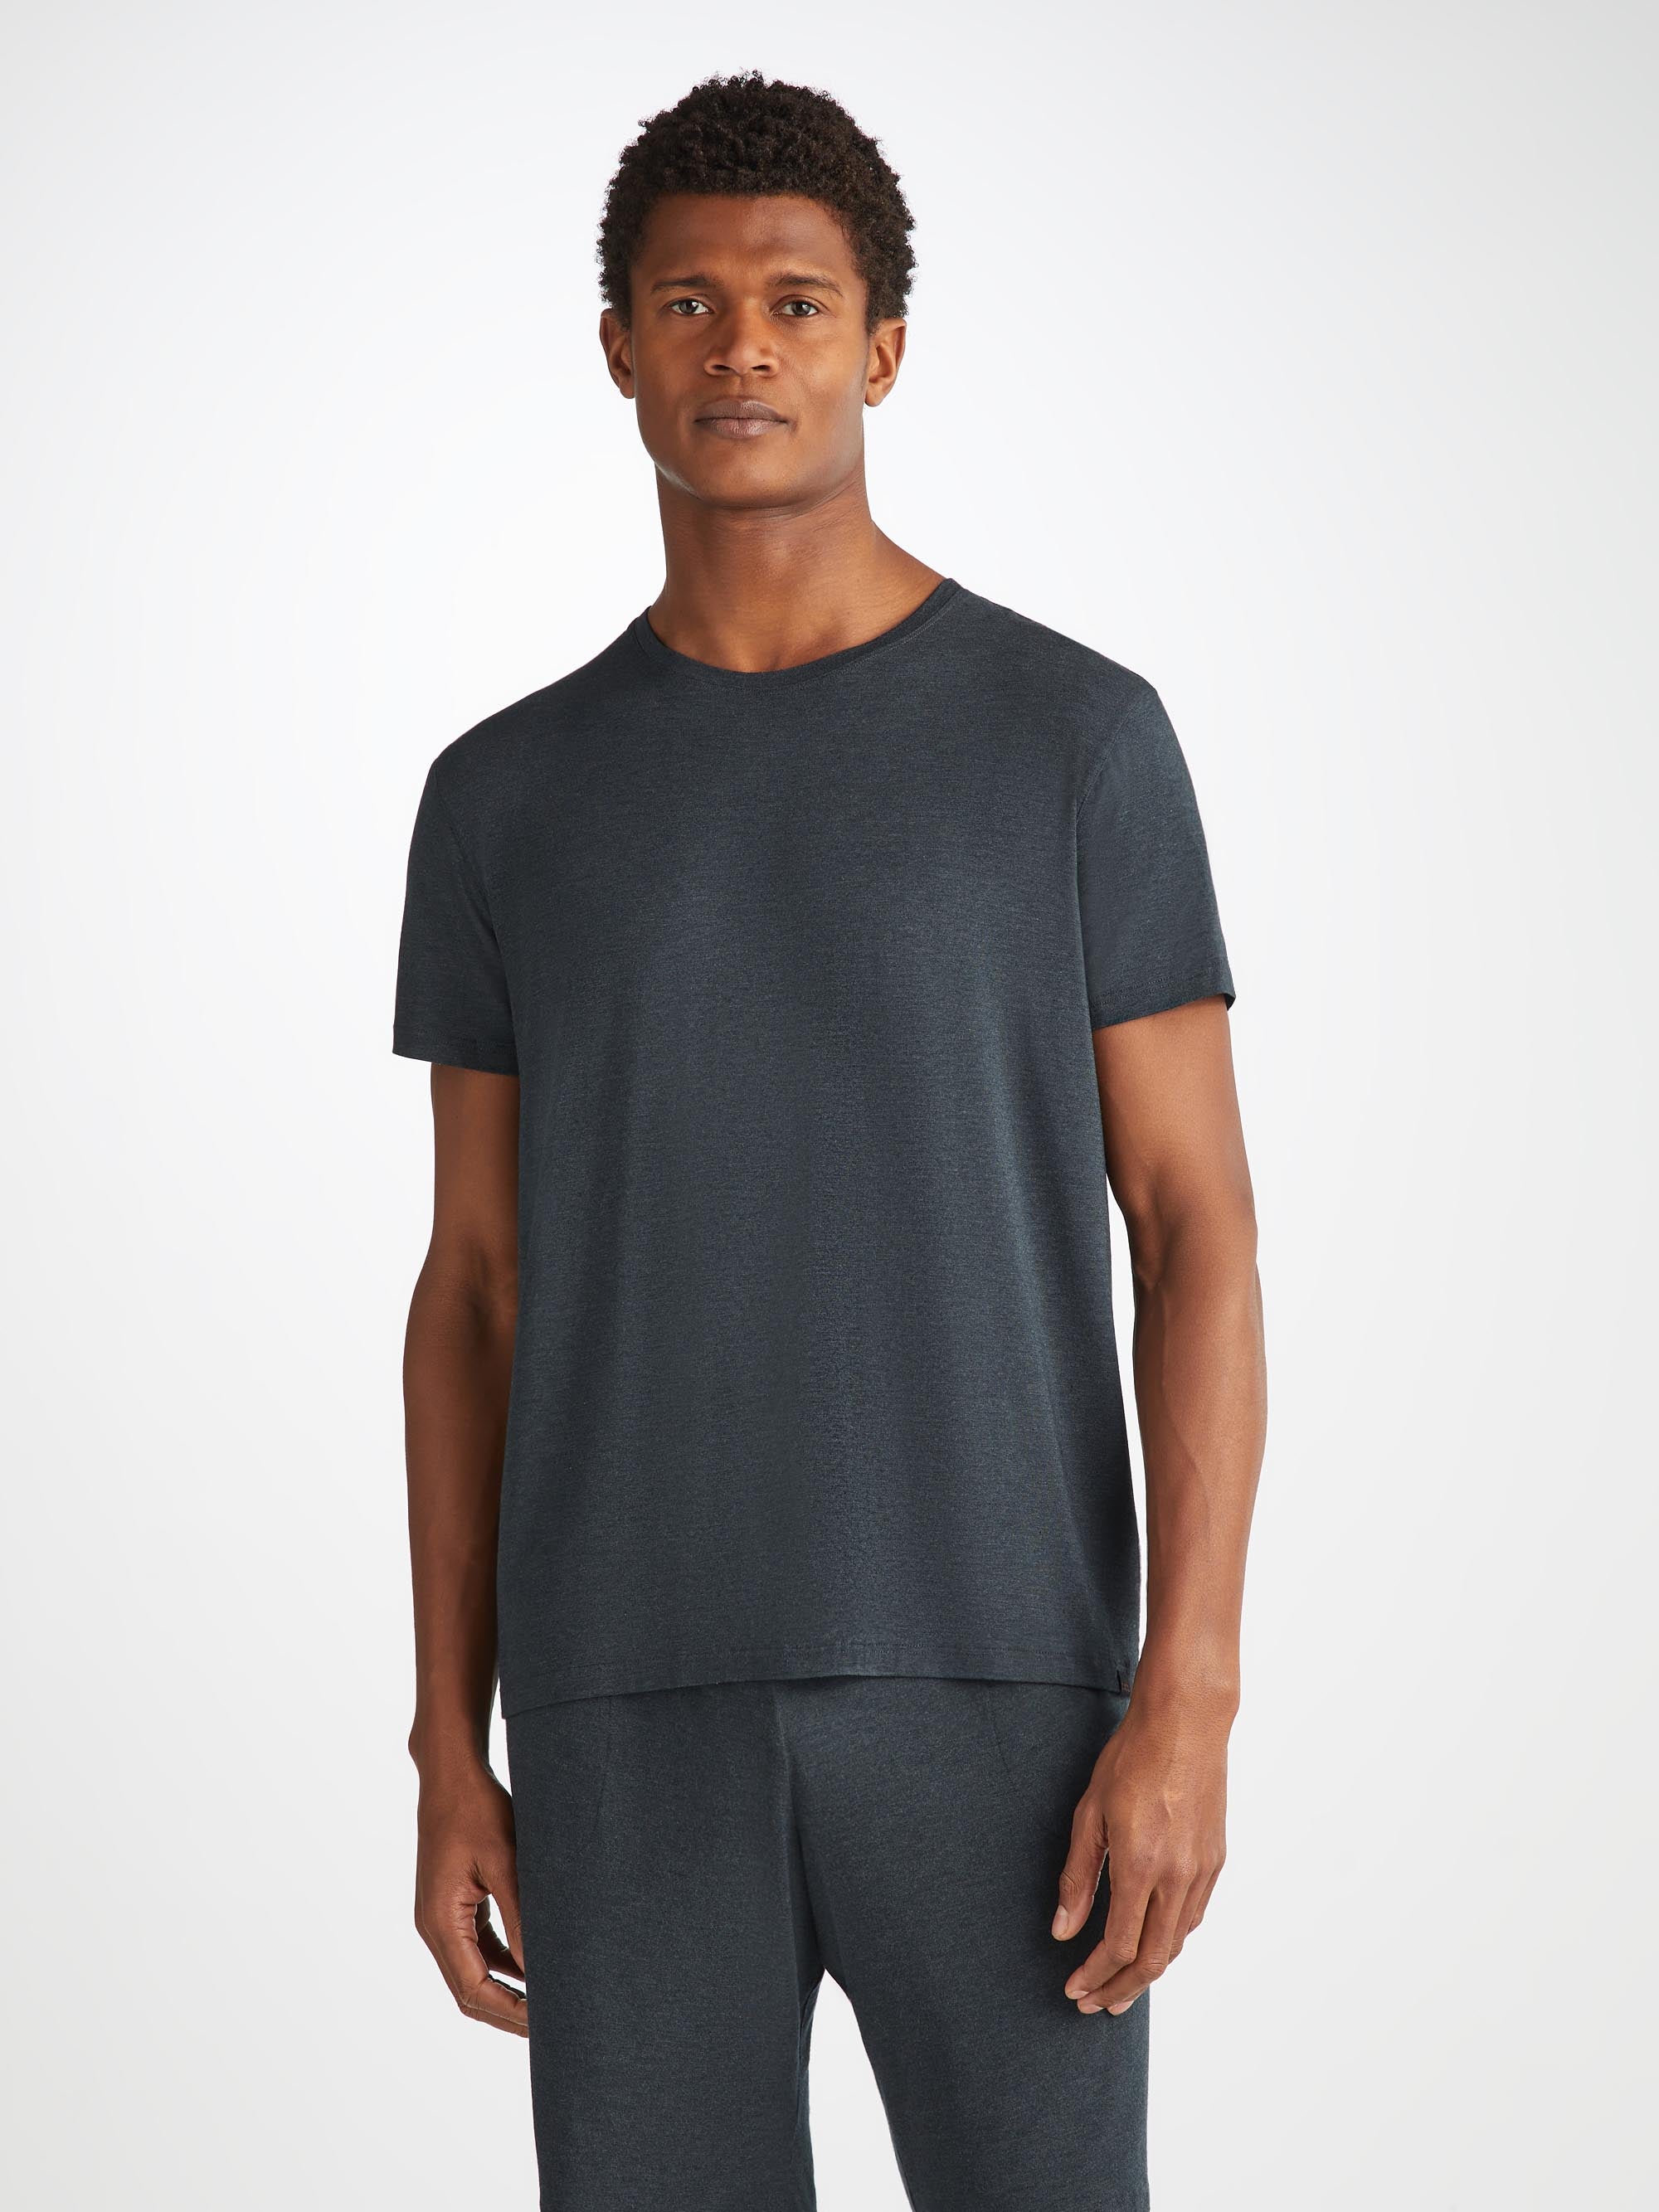 Men's T-Shirt Marlowe Micro Modal Stretch Anthracite